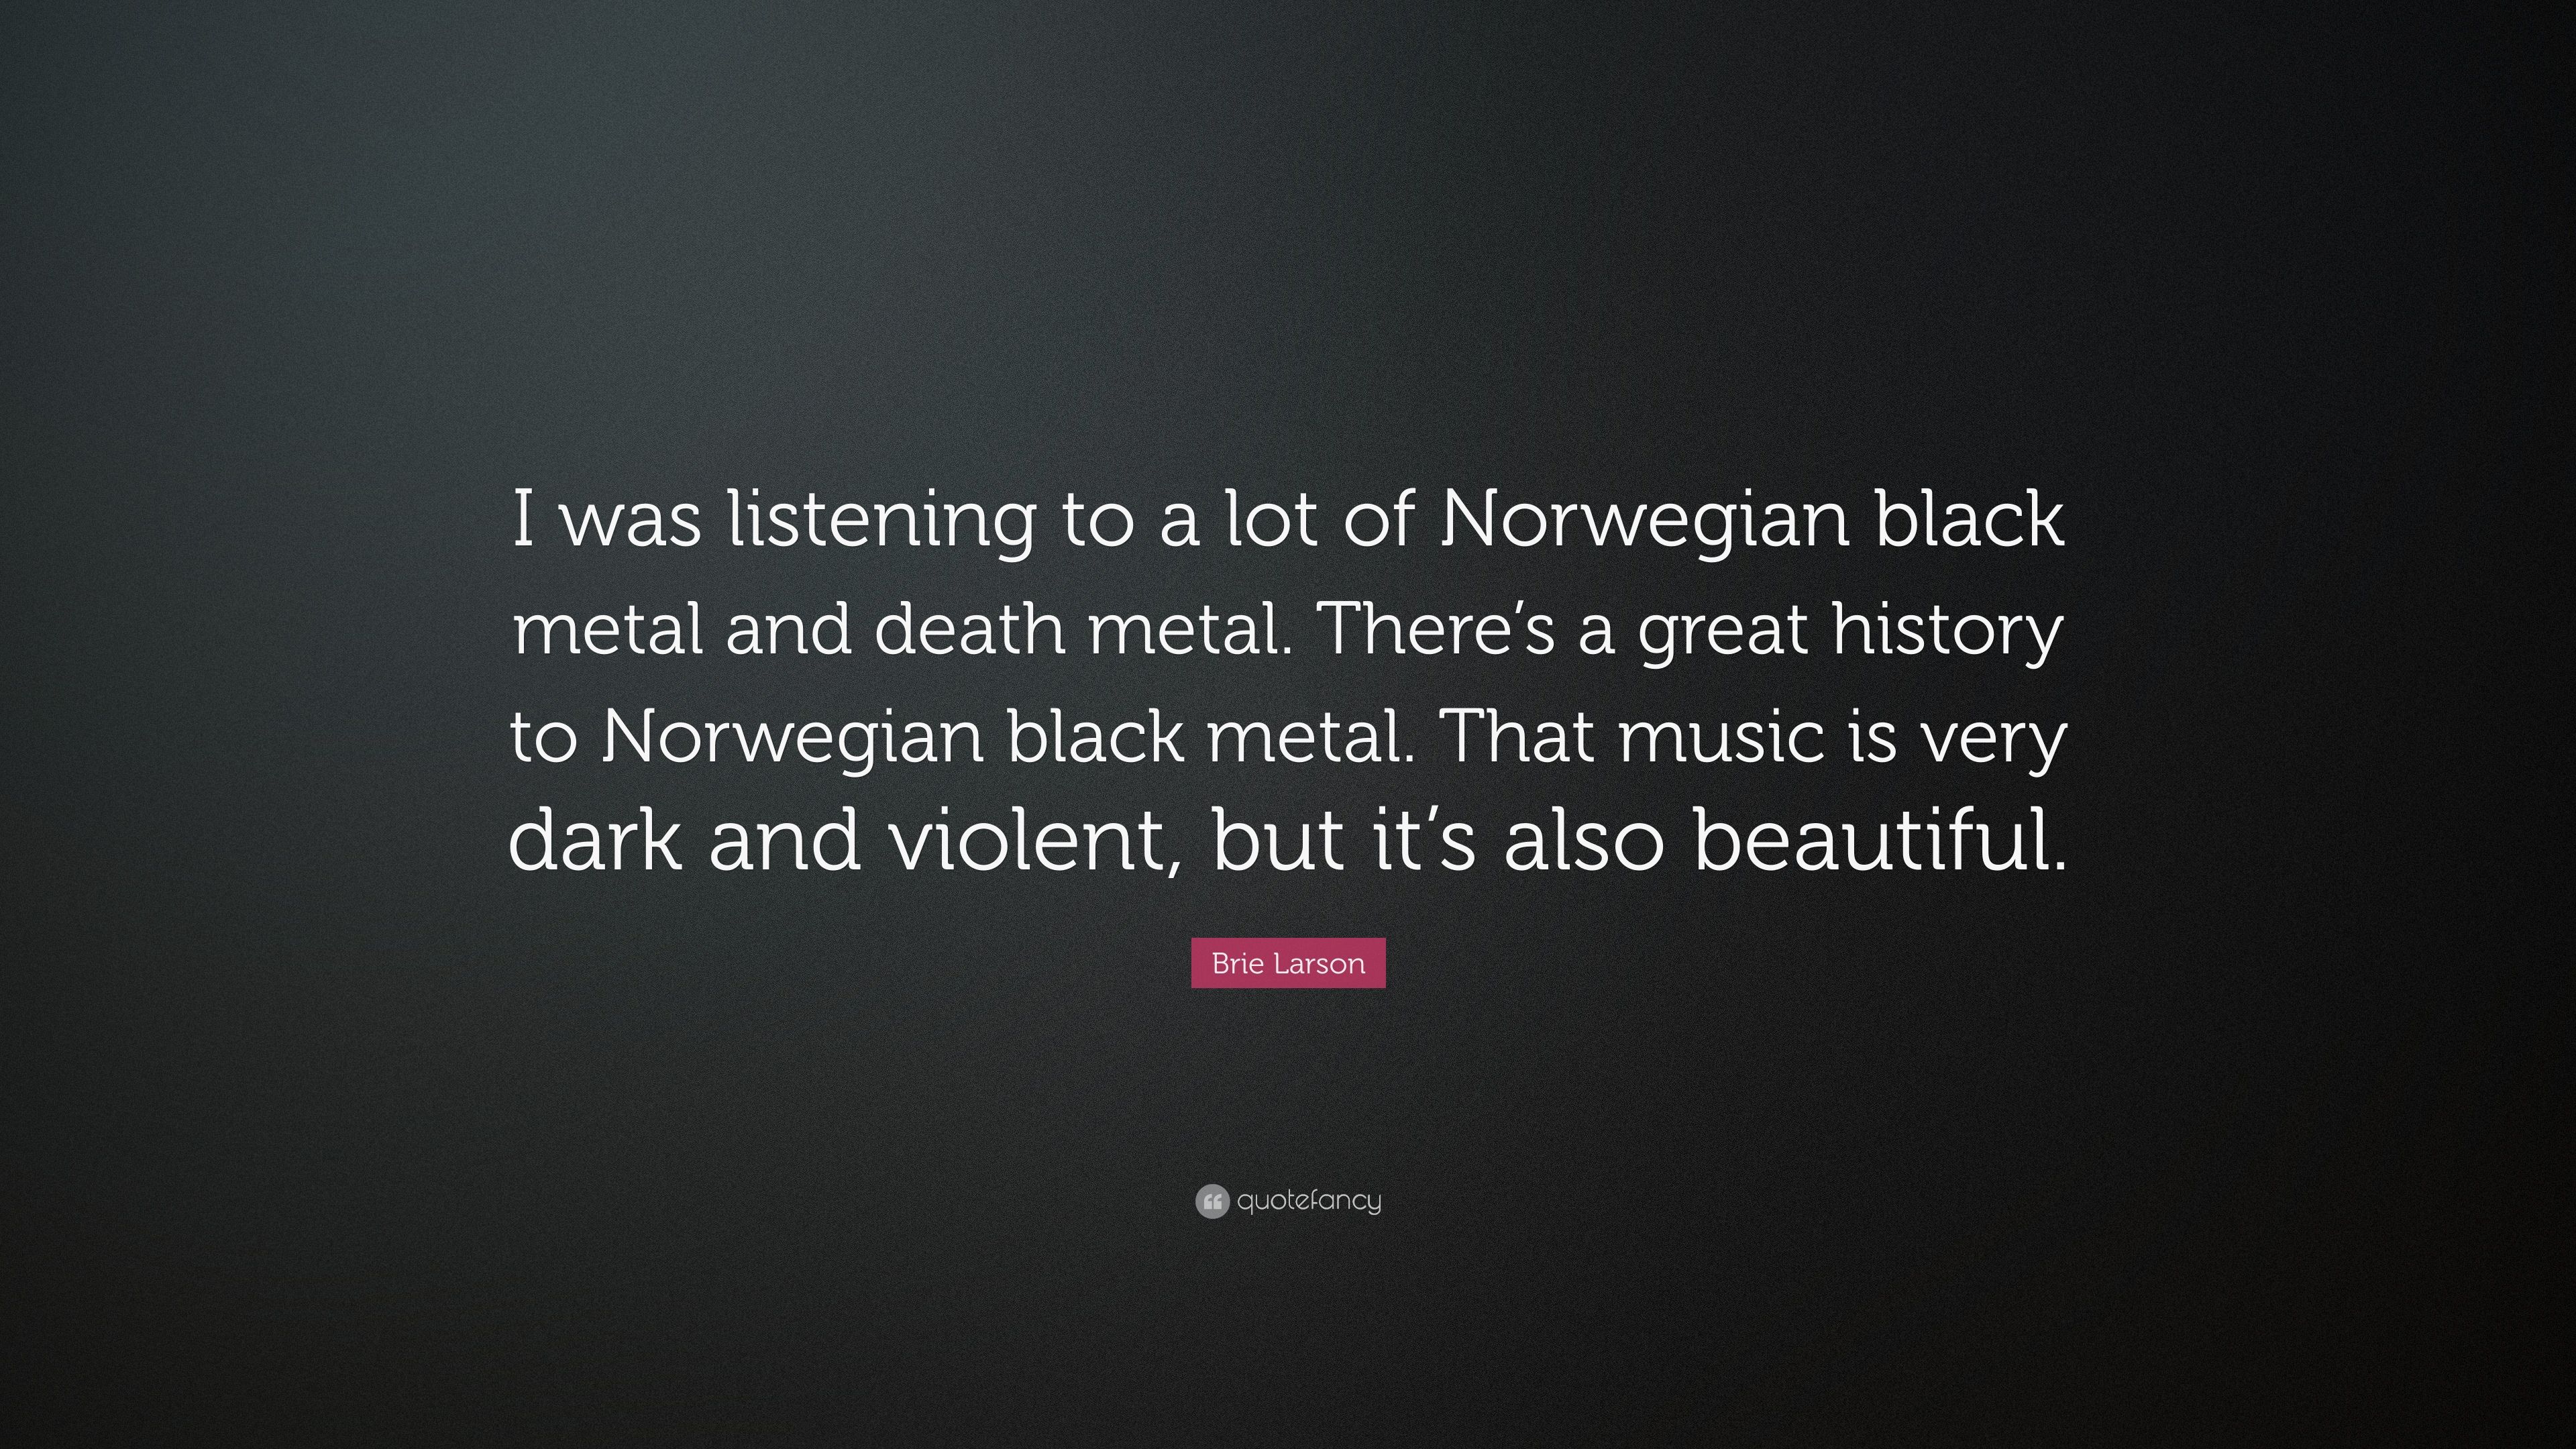 Brie Larson Quote: “I was listening to a lot of Norwegian black